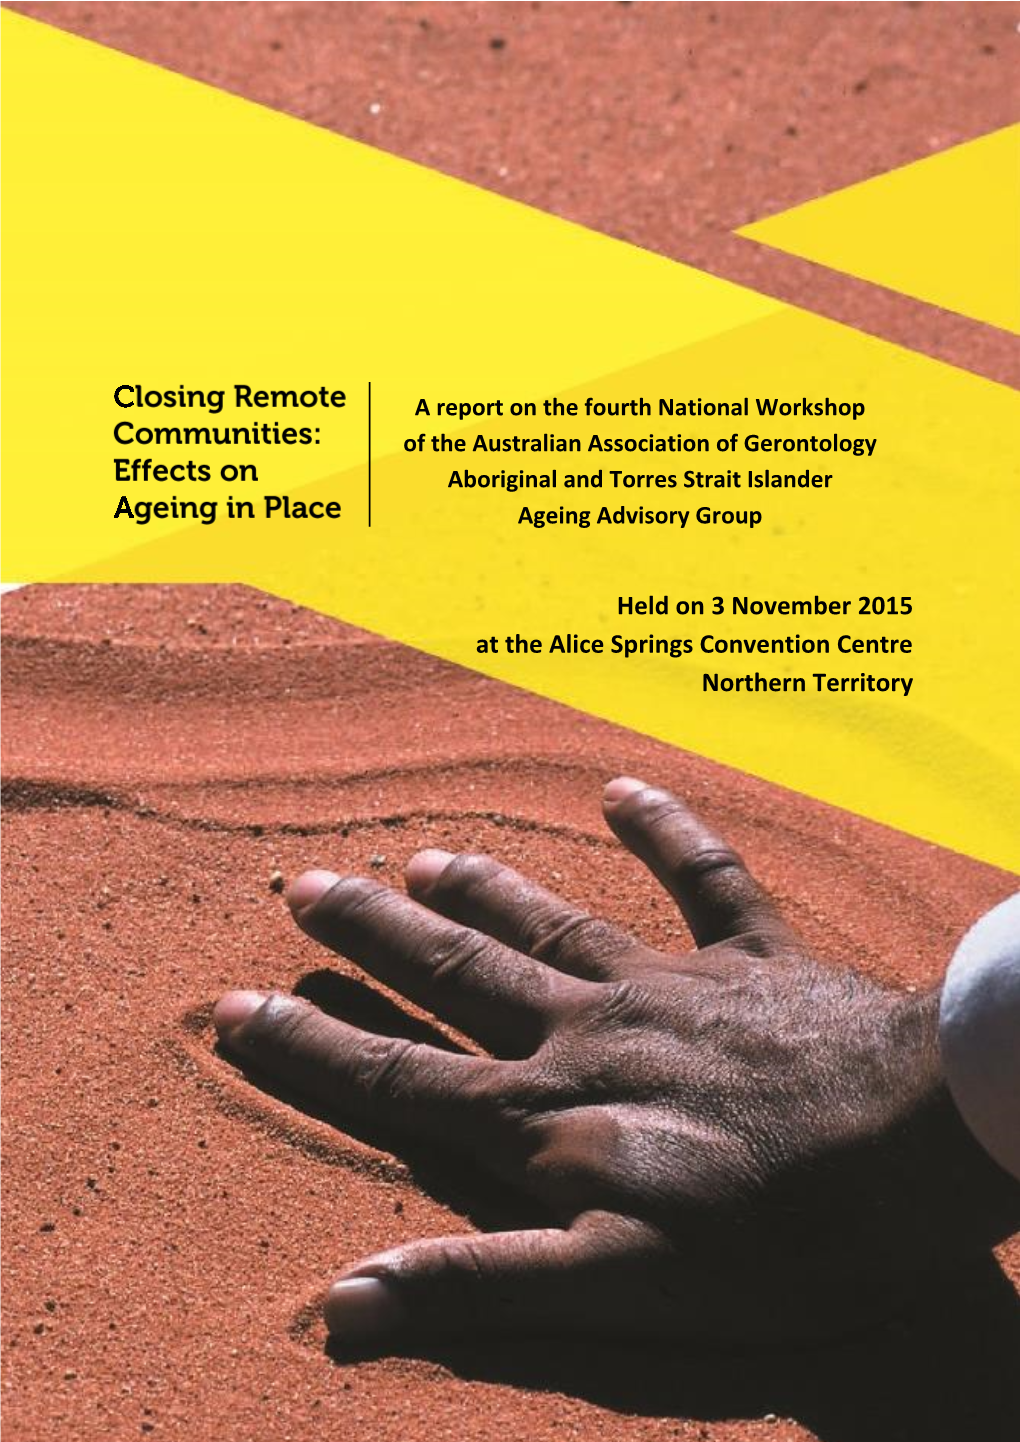 Held on 3 November 2015 at the Alice Springs Convention Centre Northern Territory